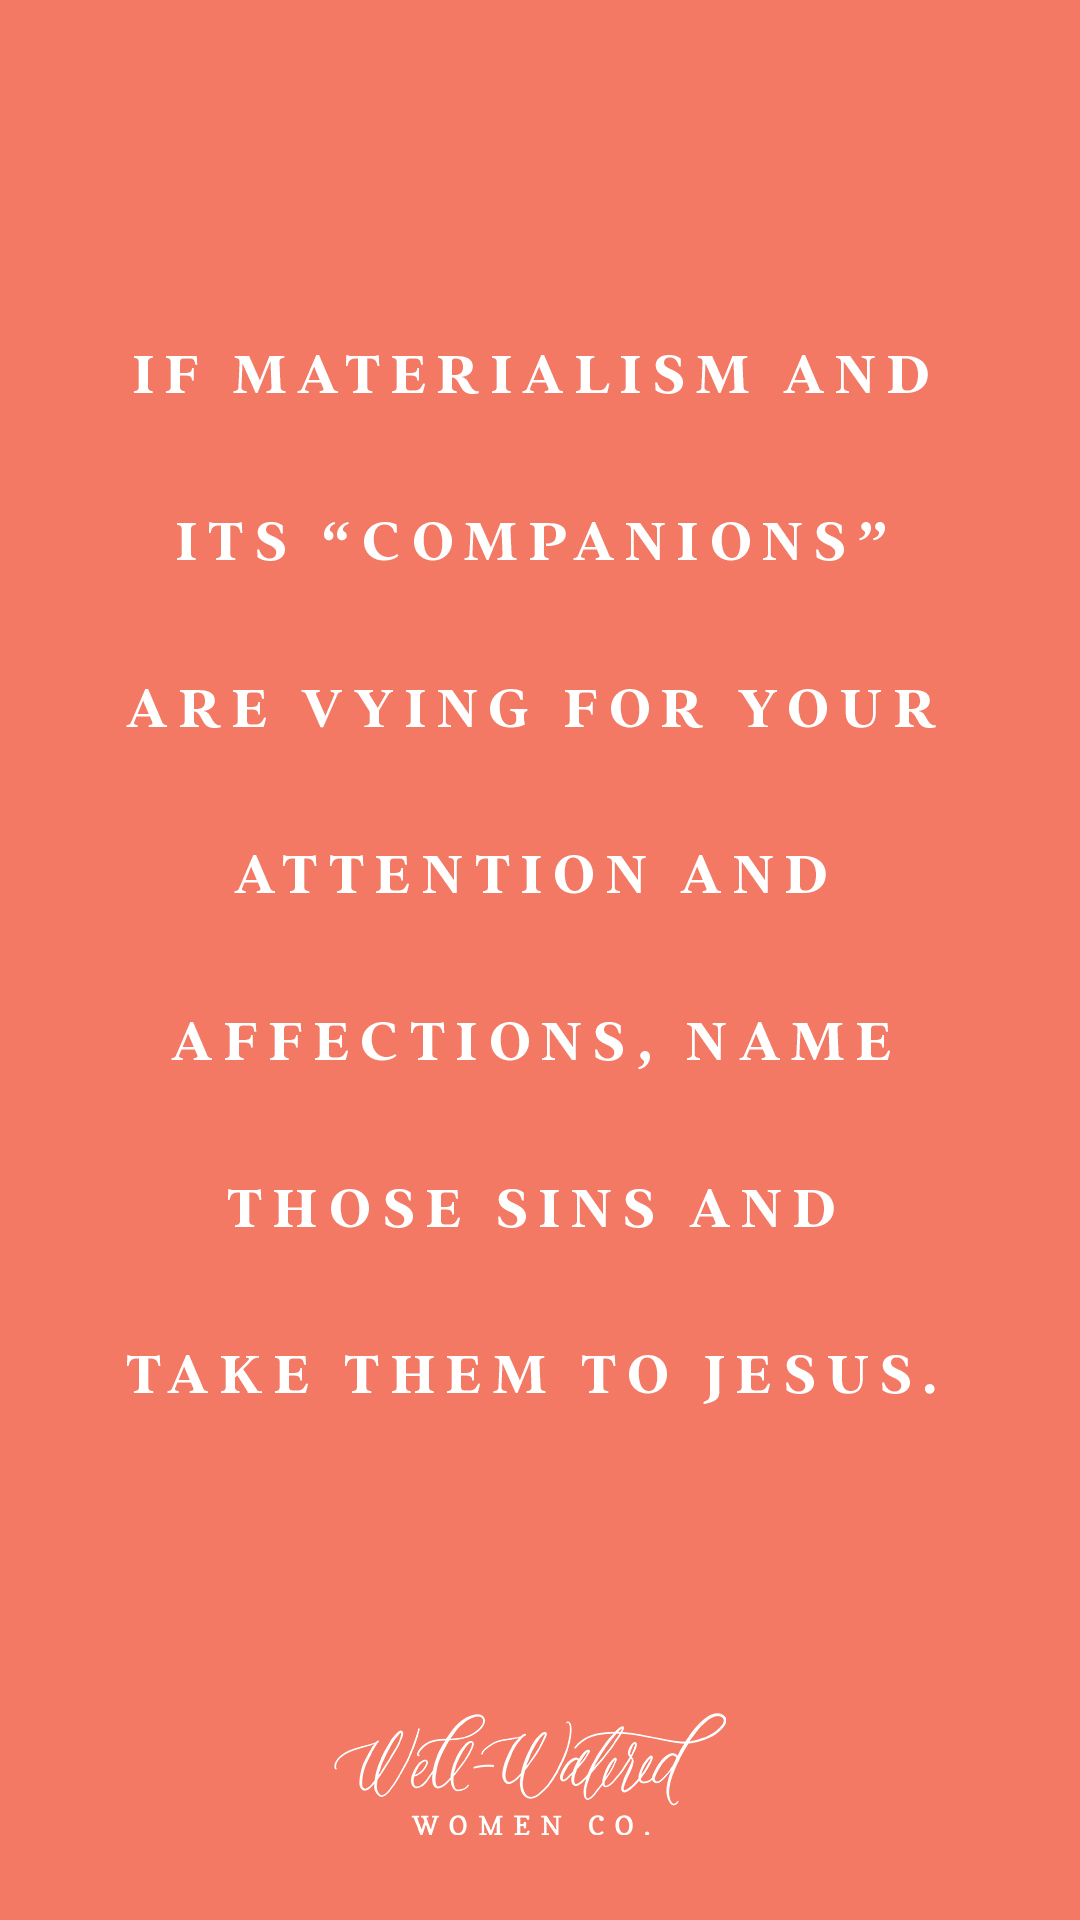 If materialism and its “companions” are vying for your attention and affections, name those sins and take them to Jesus.